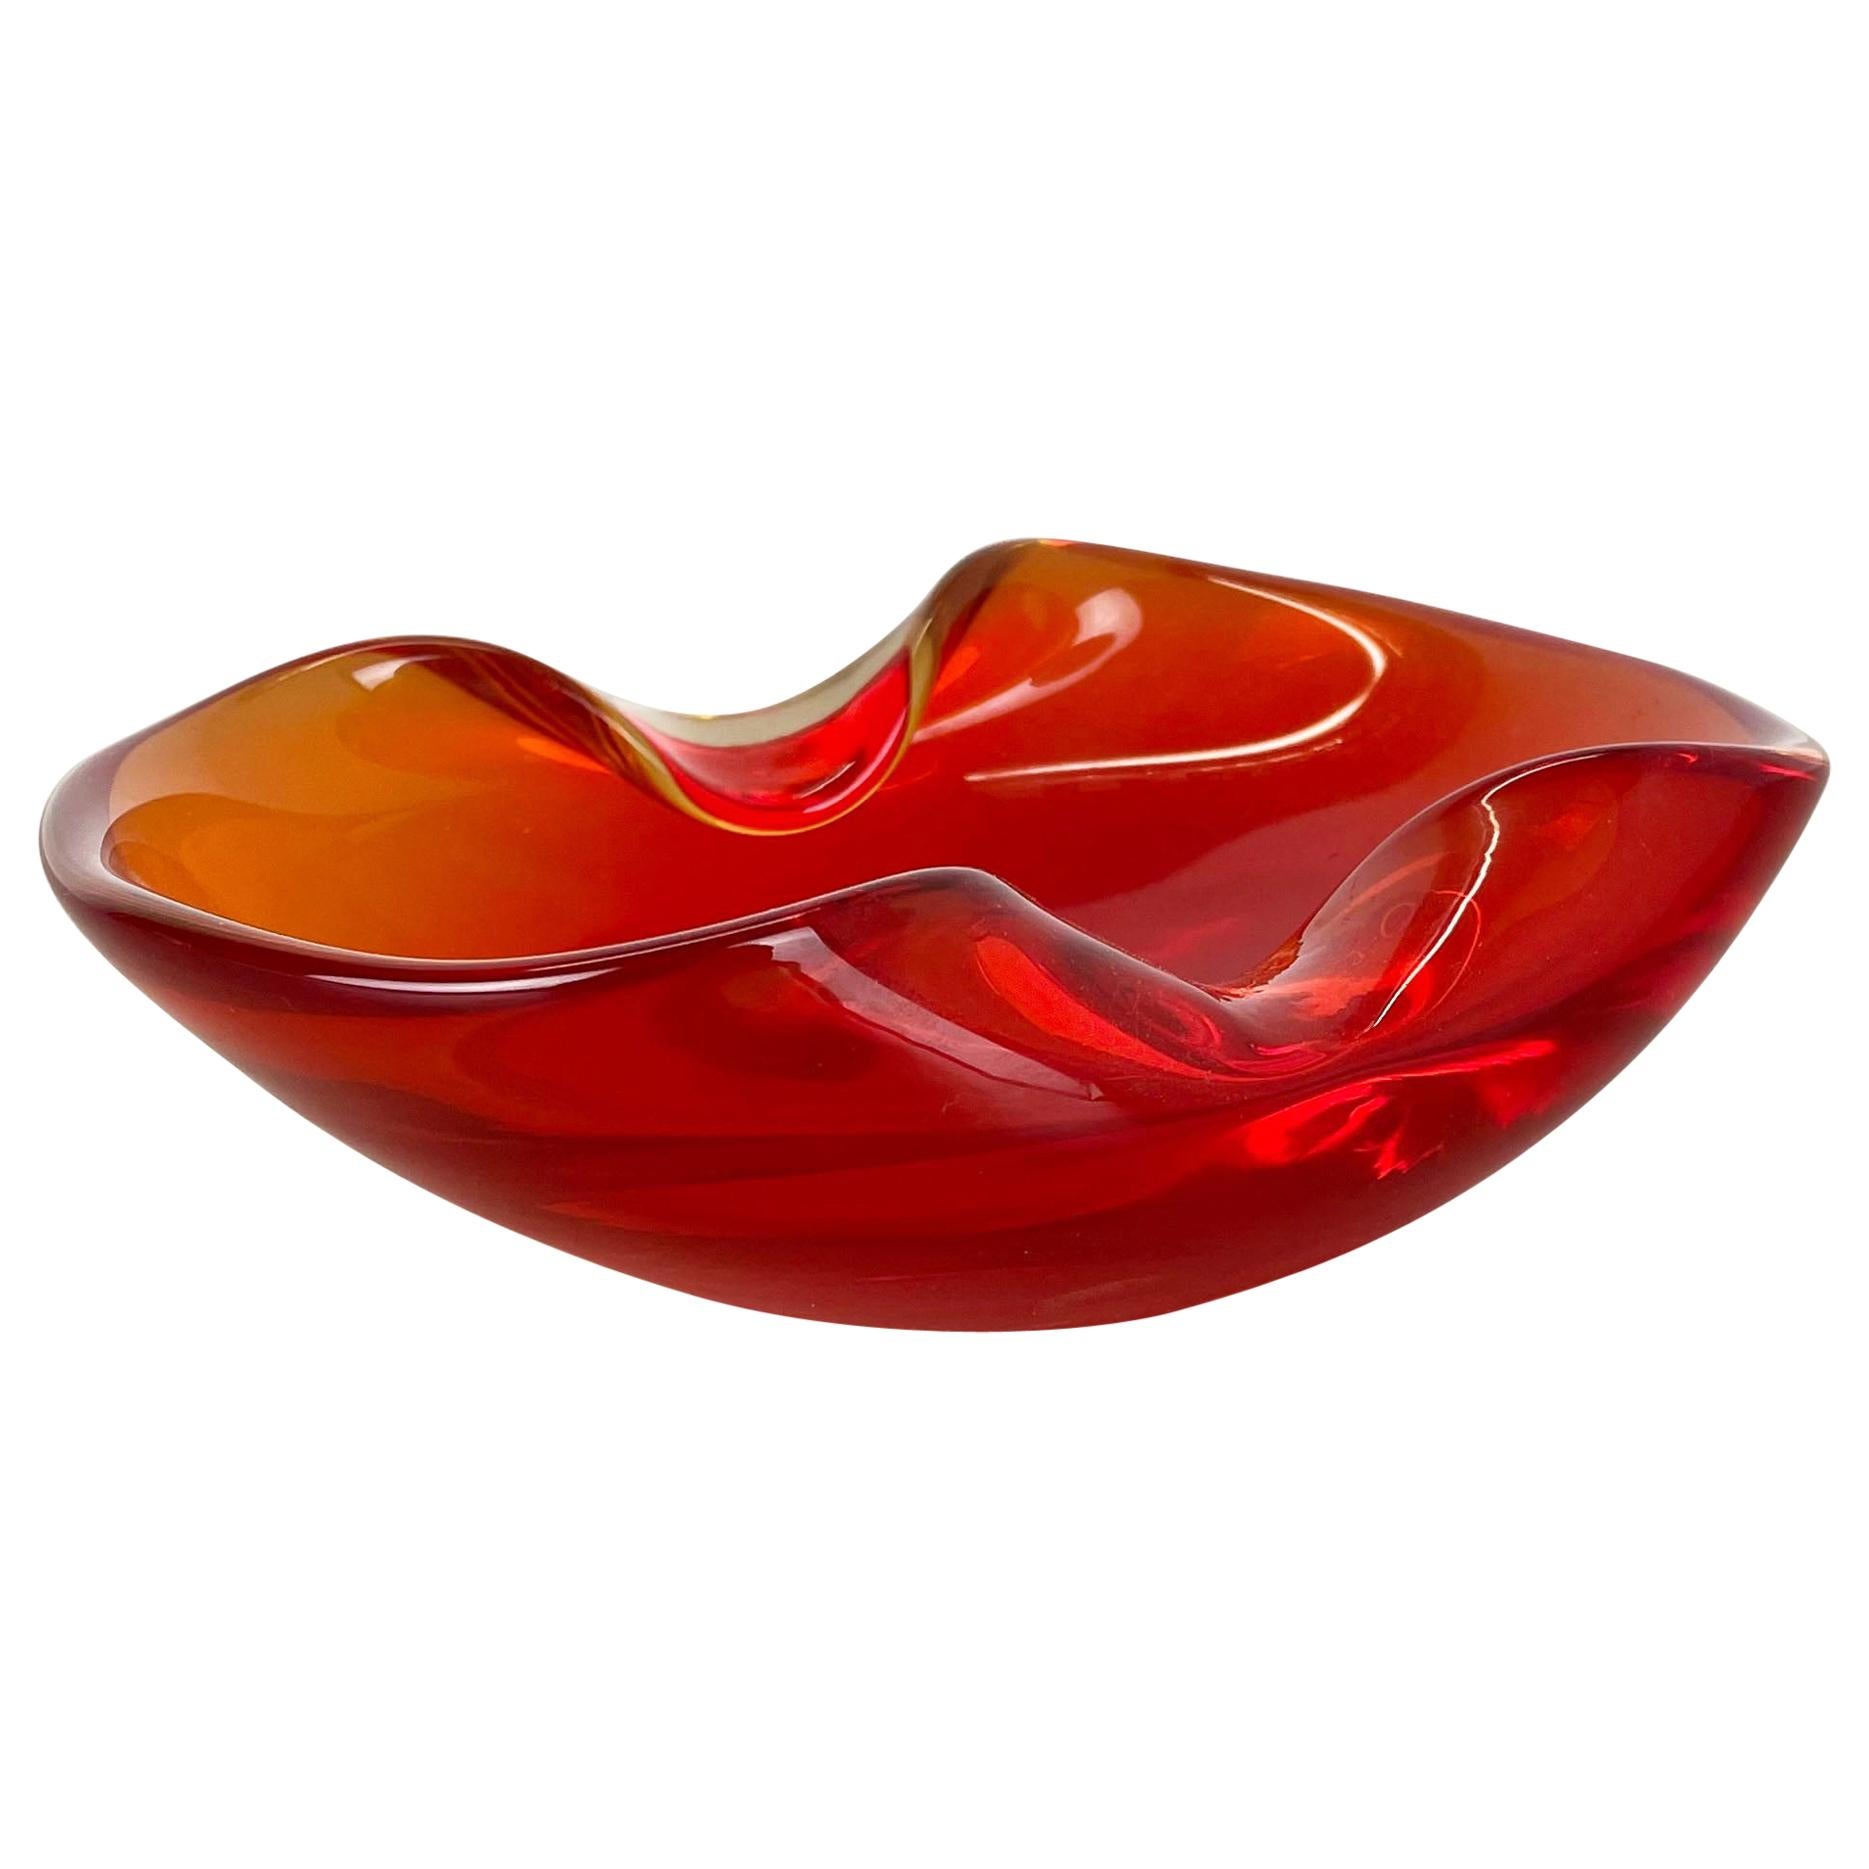 New Old Stock, Murano Red Glass Shell Bowl Antonio da Ros, Cenedese Italy, 1960s